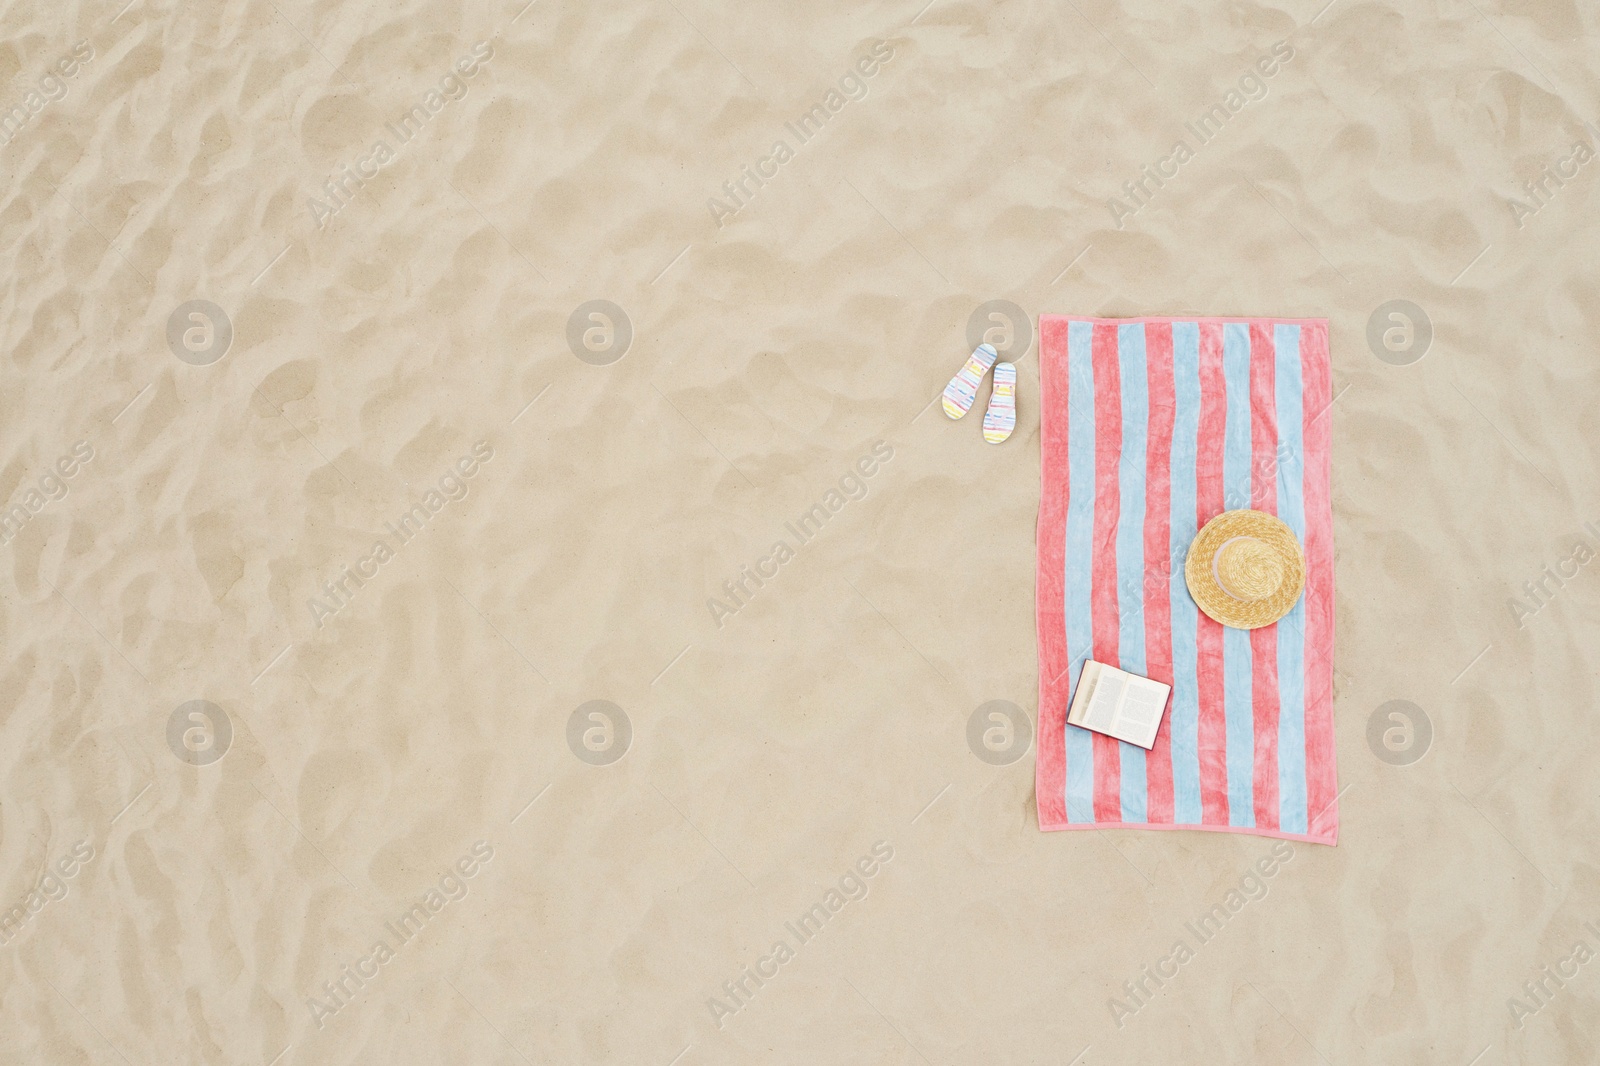 Image of Striped beach towel, book, straw hat and flip flops on sand, aerial view. Space for text